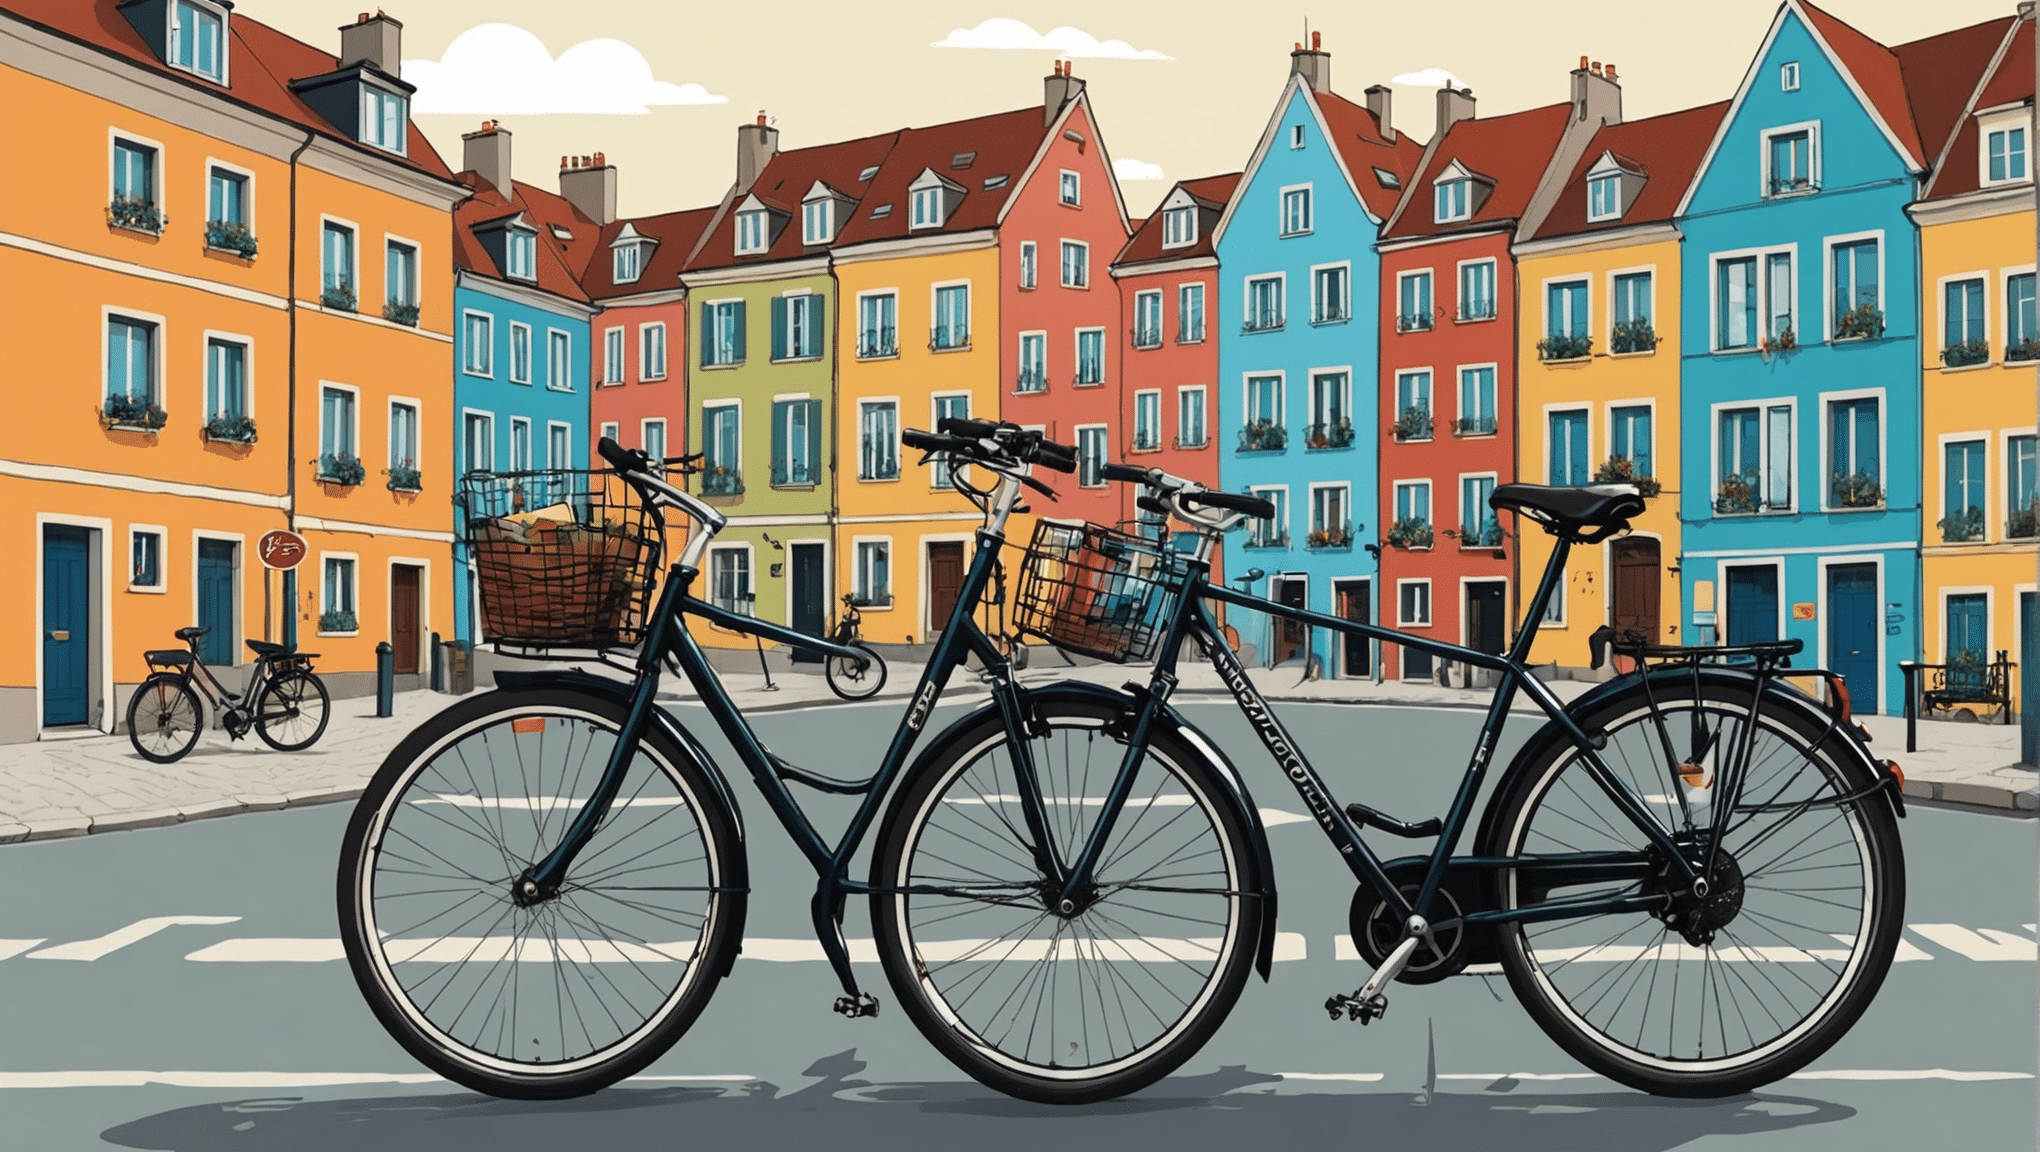 discover the must-see destinations for lovers of cycling trips in Europe with our complete guide. breathtaking landscapes and unique experiences await you!